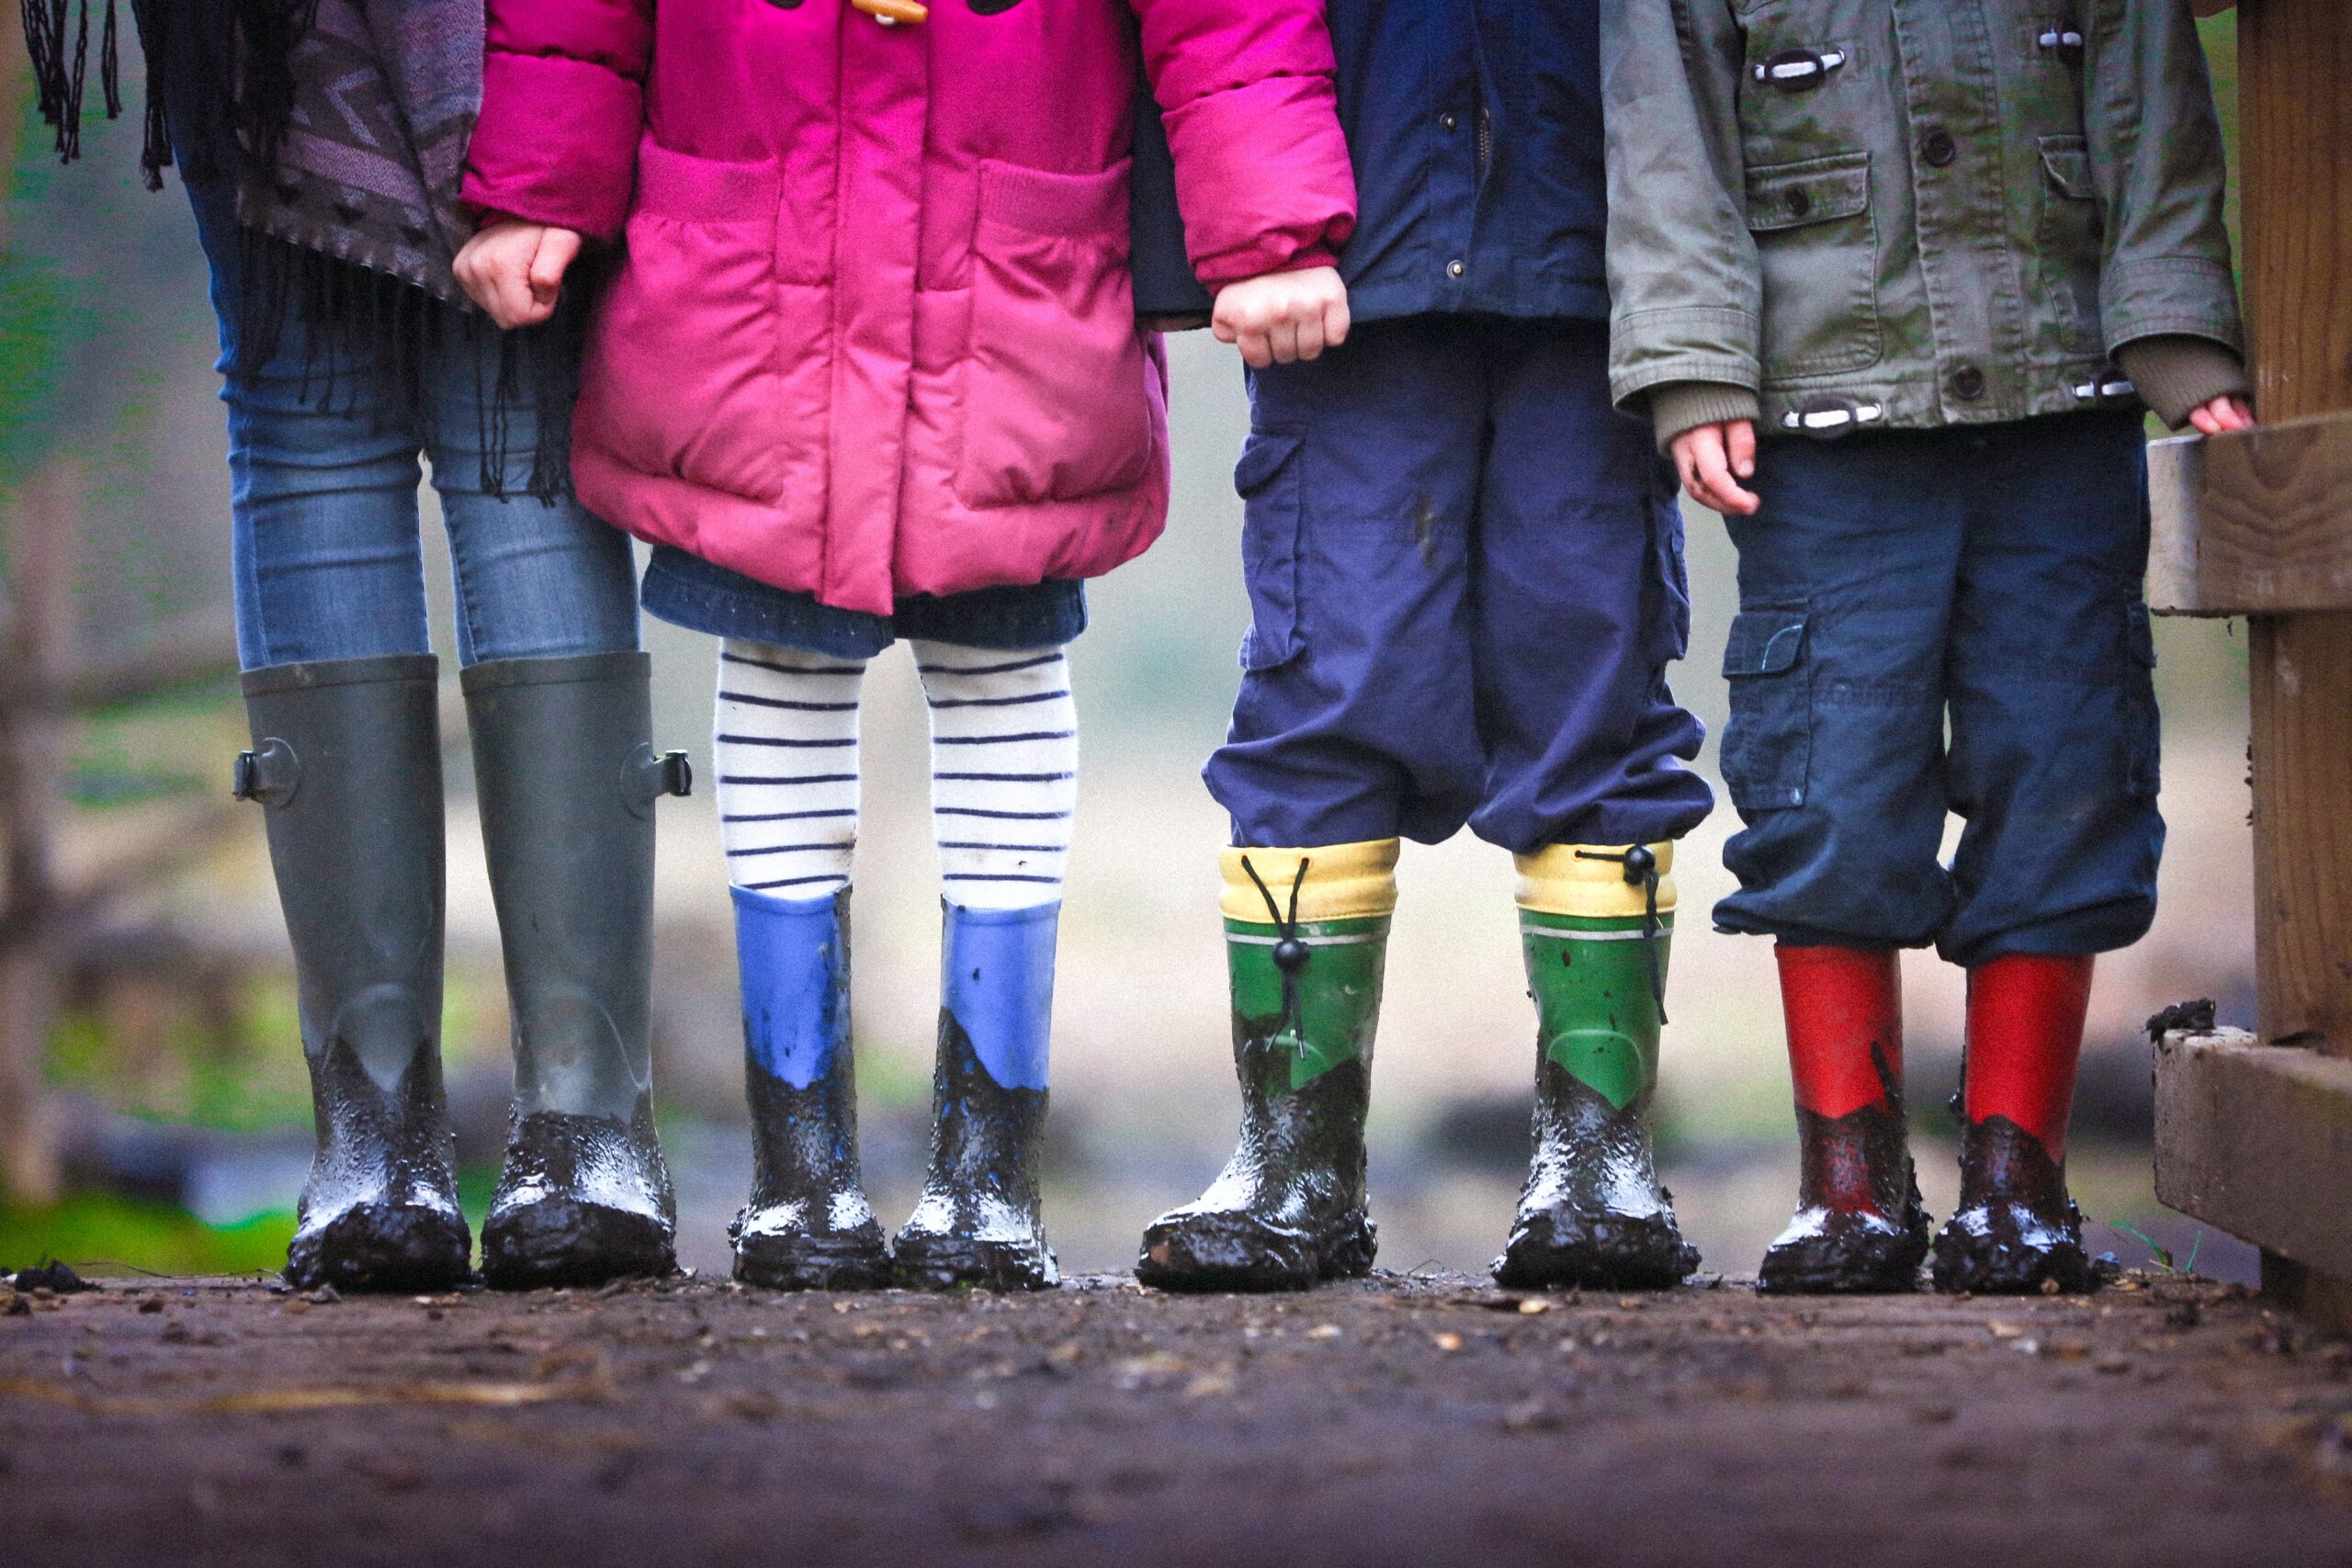 Four people standing in muddy rubber boots.